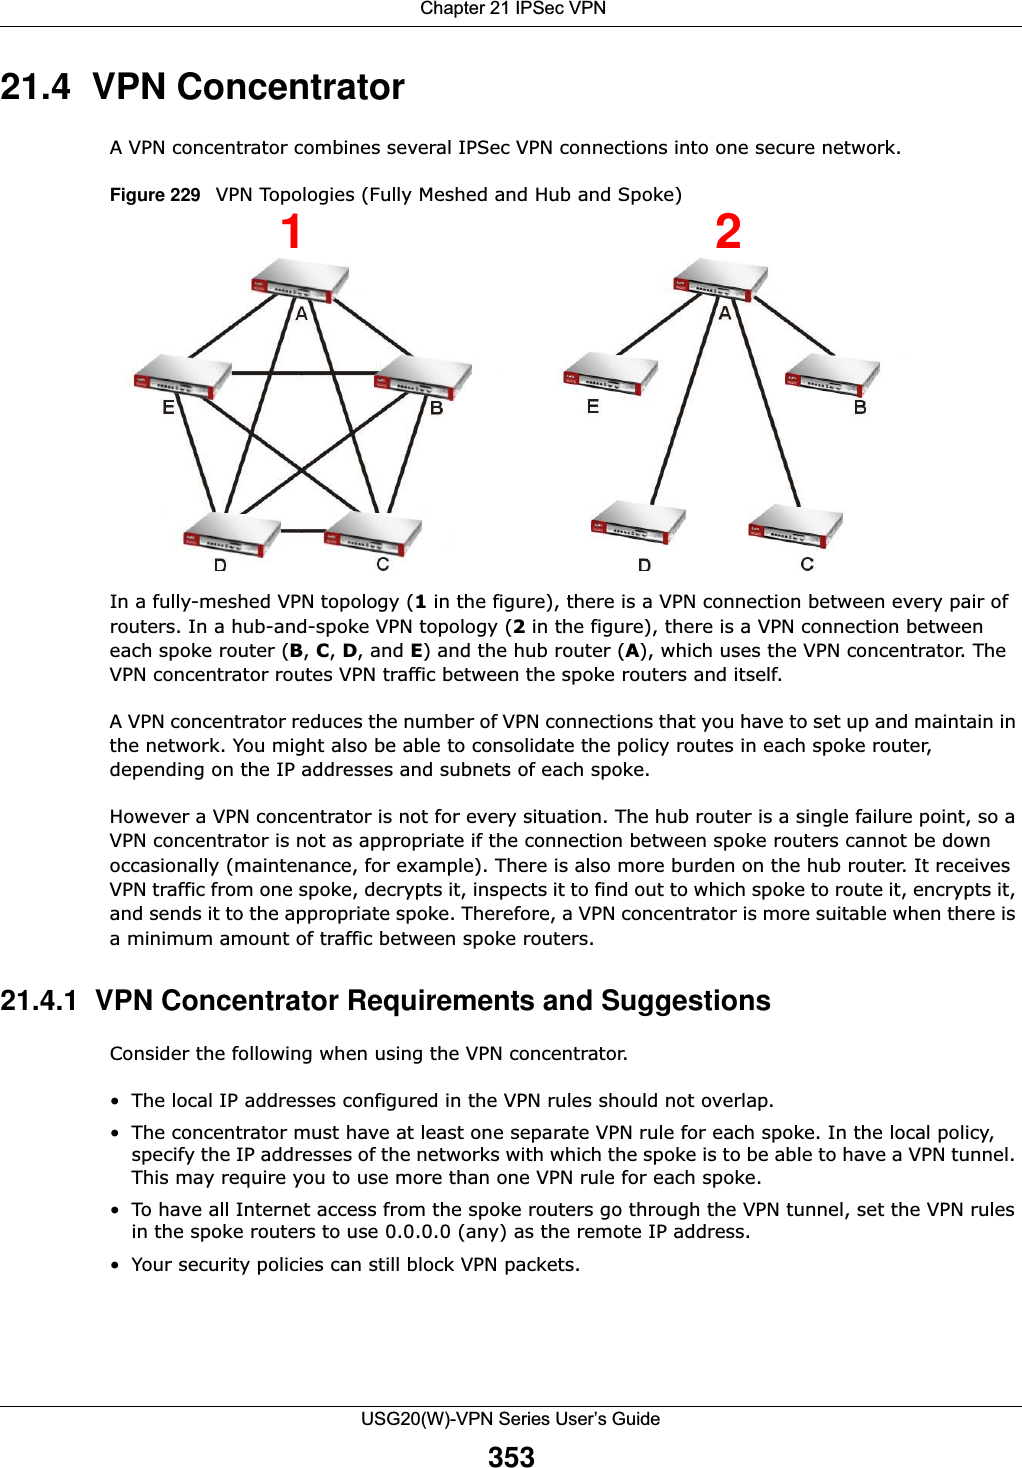  Chapter 21 IPSec VPNUSG20(W)-VPN Series User’s Guide35321.4  VPN Concentrator A VPN concentrator combines several IPSec VPN connections into one secure network. Figure 229   VPN Topologies (Fully Meshed and Hub and Spoke)In a fully-meshed VPN topology (1 in the figure), there is a VPN connection between every pair of routers. In a hub-and-spoke VPN topology (2 in the figure), there is a VPN connection between each spoke router (B, C, D, and E) and the hub router (A), which uses the VPN concentrator. The VPN concentrator routes VPN traffic between the spoke routers and itself. A VPN concentrator reduces the number of VPN connections that you have to set up and maintain in the network. You might also be able to consolidate the policy routes in each spoke router, depending on the IP addresses and subnets of each spoke.However a VPN concentrator is not for every situation. The hub router is a single failure point, so a VPN concentrator is not as appropriate if the connection between spoke routers cannot be down occasionally (maintenance, for example). There is also more burden on the hub router. It receives VPN traffic from one spoke, decrypts it, inspects it to find out to which spoke to route it, encrypts it, and sends it to the appropriate spoke. Therefore, a VPN concentrator is more suitable when there is a minimum amount of traffic between spoke routers.21.4.1  VPN Concentrator Requirements and SuggestionsConsider the following when using the VPN concentrator.• The local IP addresses configured in the VPN rules should not overlap.• The concentrator must have at least one separate VPN rule for each spoke. In the local policy, specify the IP addresses of the networks with which the spoke is to be able to have a VPN tunnel. This may require you to use more than one VPN rule for each spoke. • To have all Internet access from the spoke routers go through the VPN tunnel, set the VPN rules in the spoke routers to use 0.0.0.0 (any) as the remote IP address. • Your security policies can still block VPN packets.12